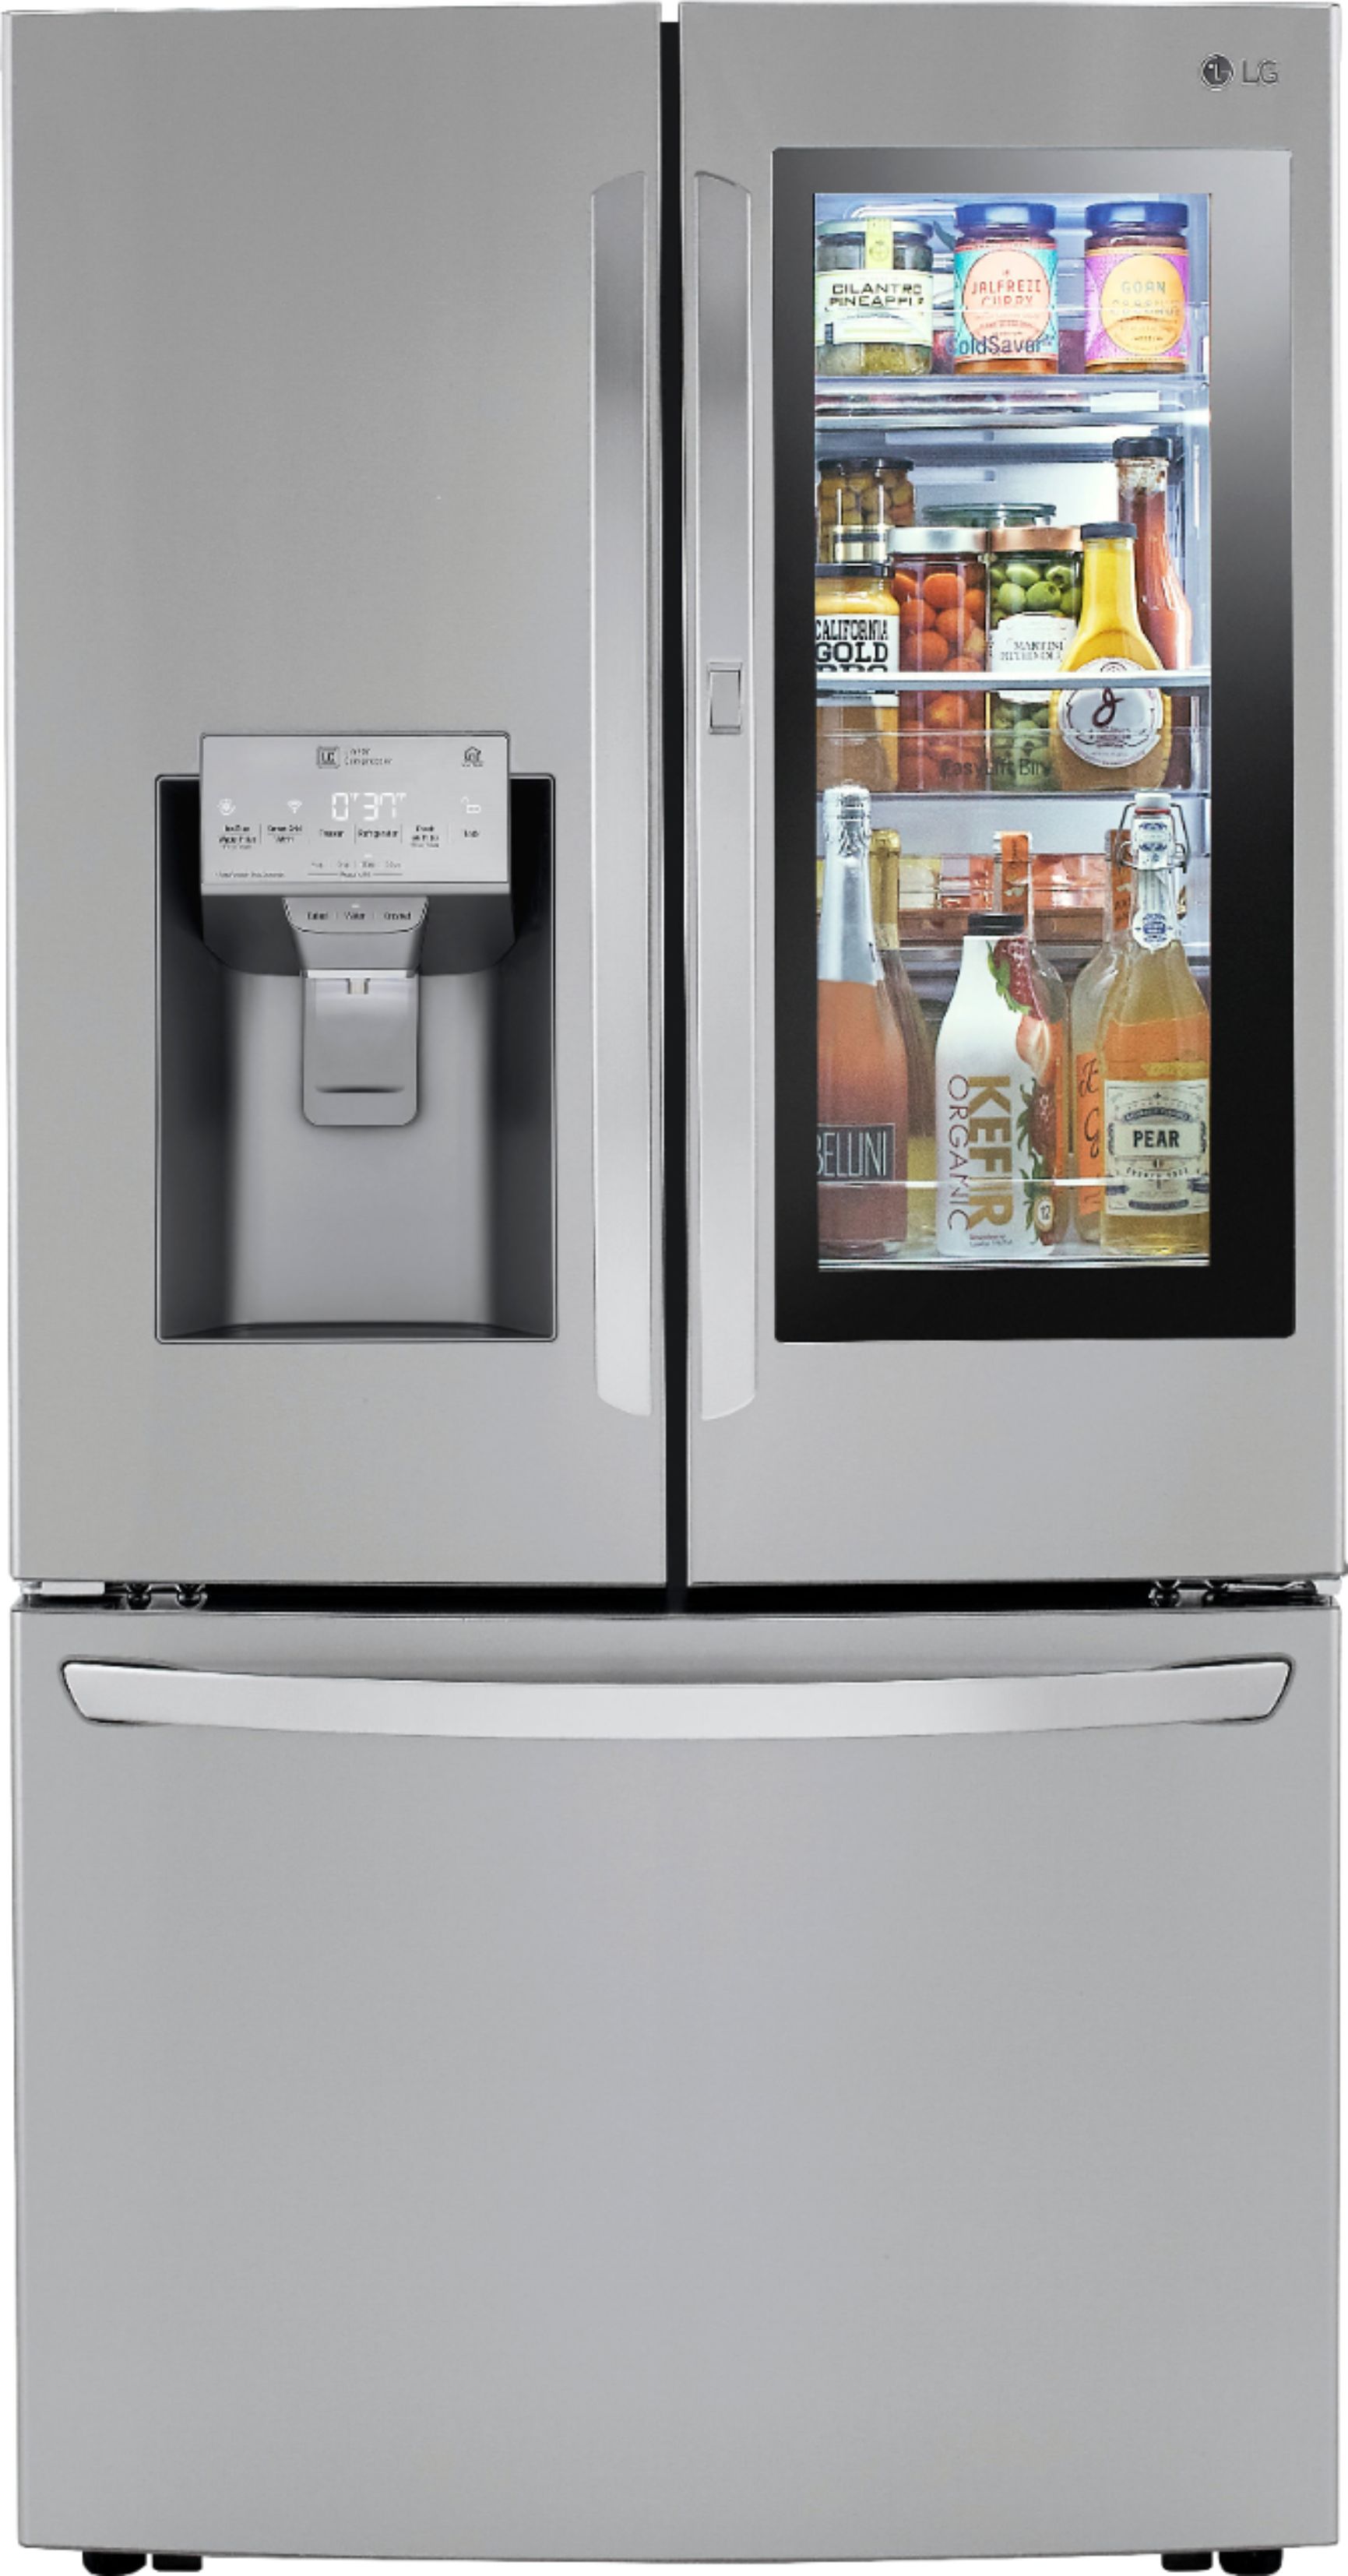 7 Easy Fixes To Stop Lg Refrigerator Ice Maker Knocking Noise